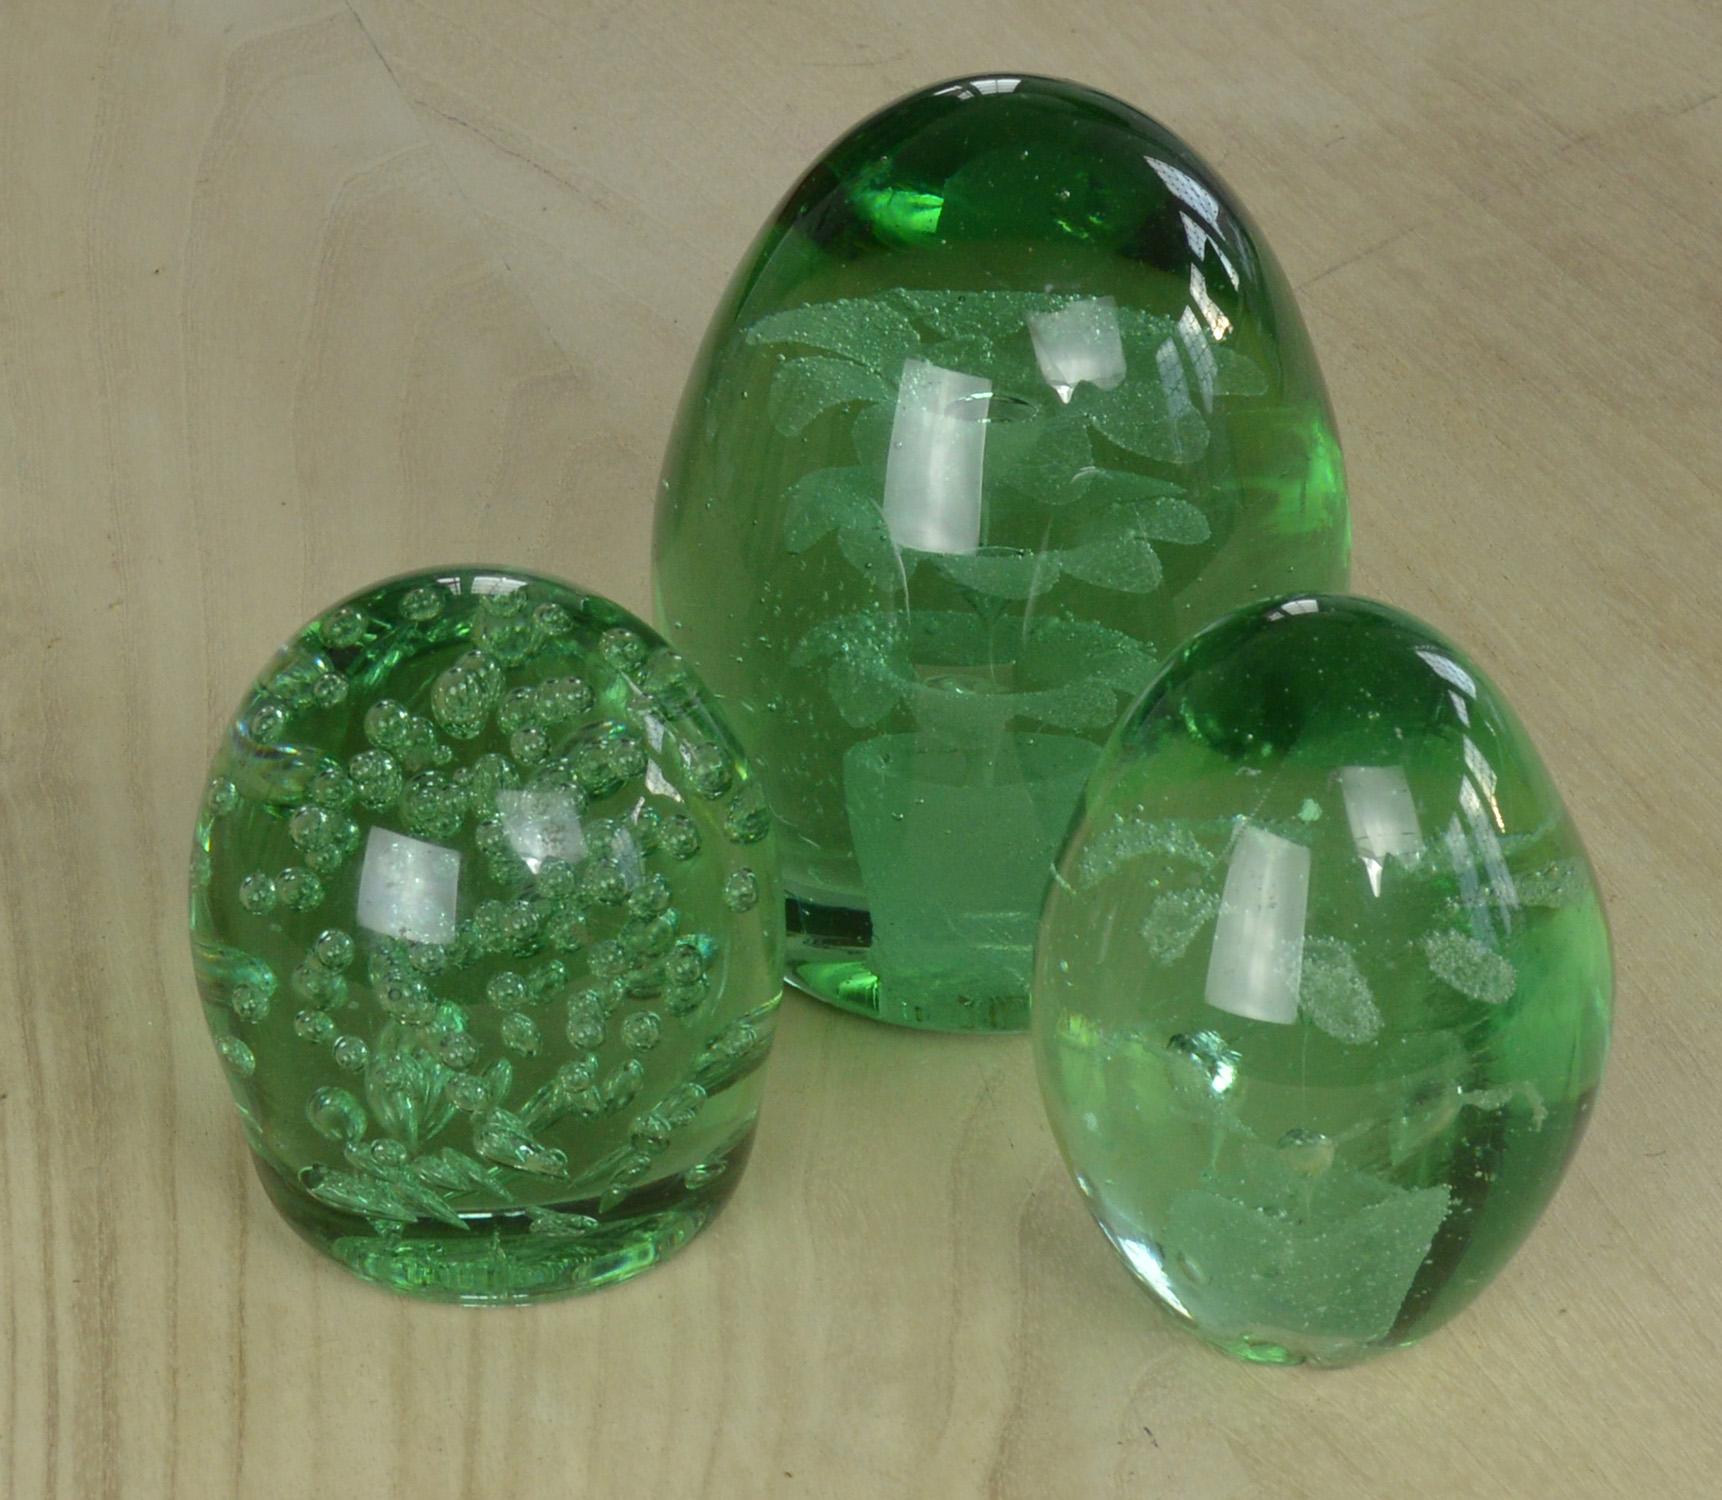 Wonderful pieces of green glass with a bubble effect / floral interior.

Subtle differences in shades of green.

Makes a great feature.

The measurement given below is for the largest piece.